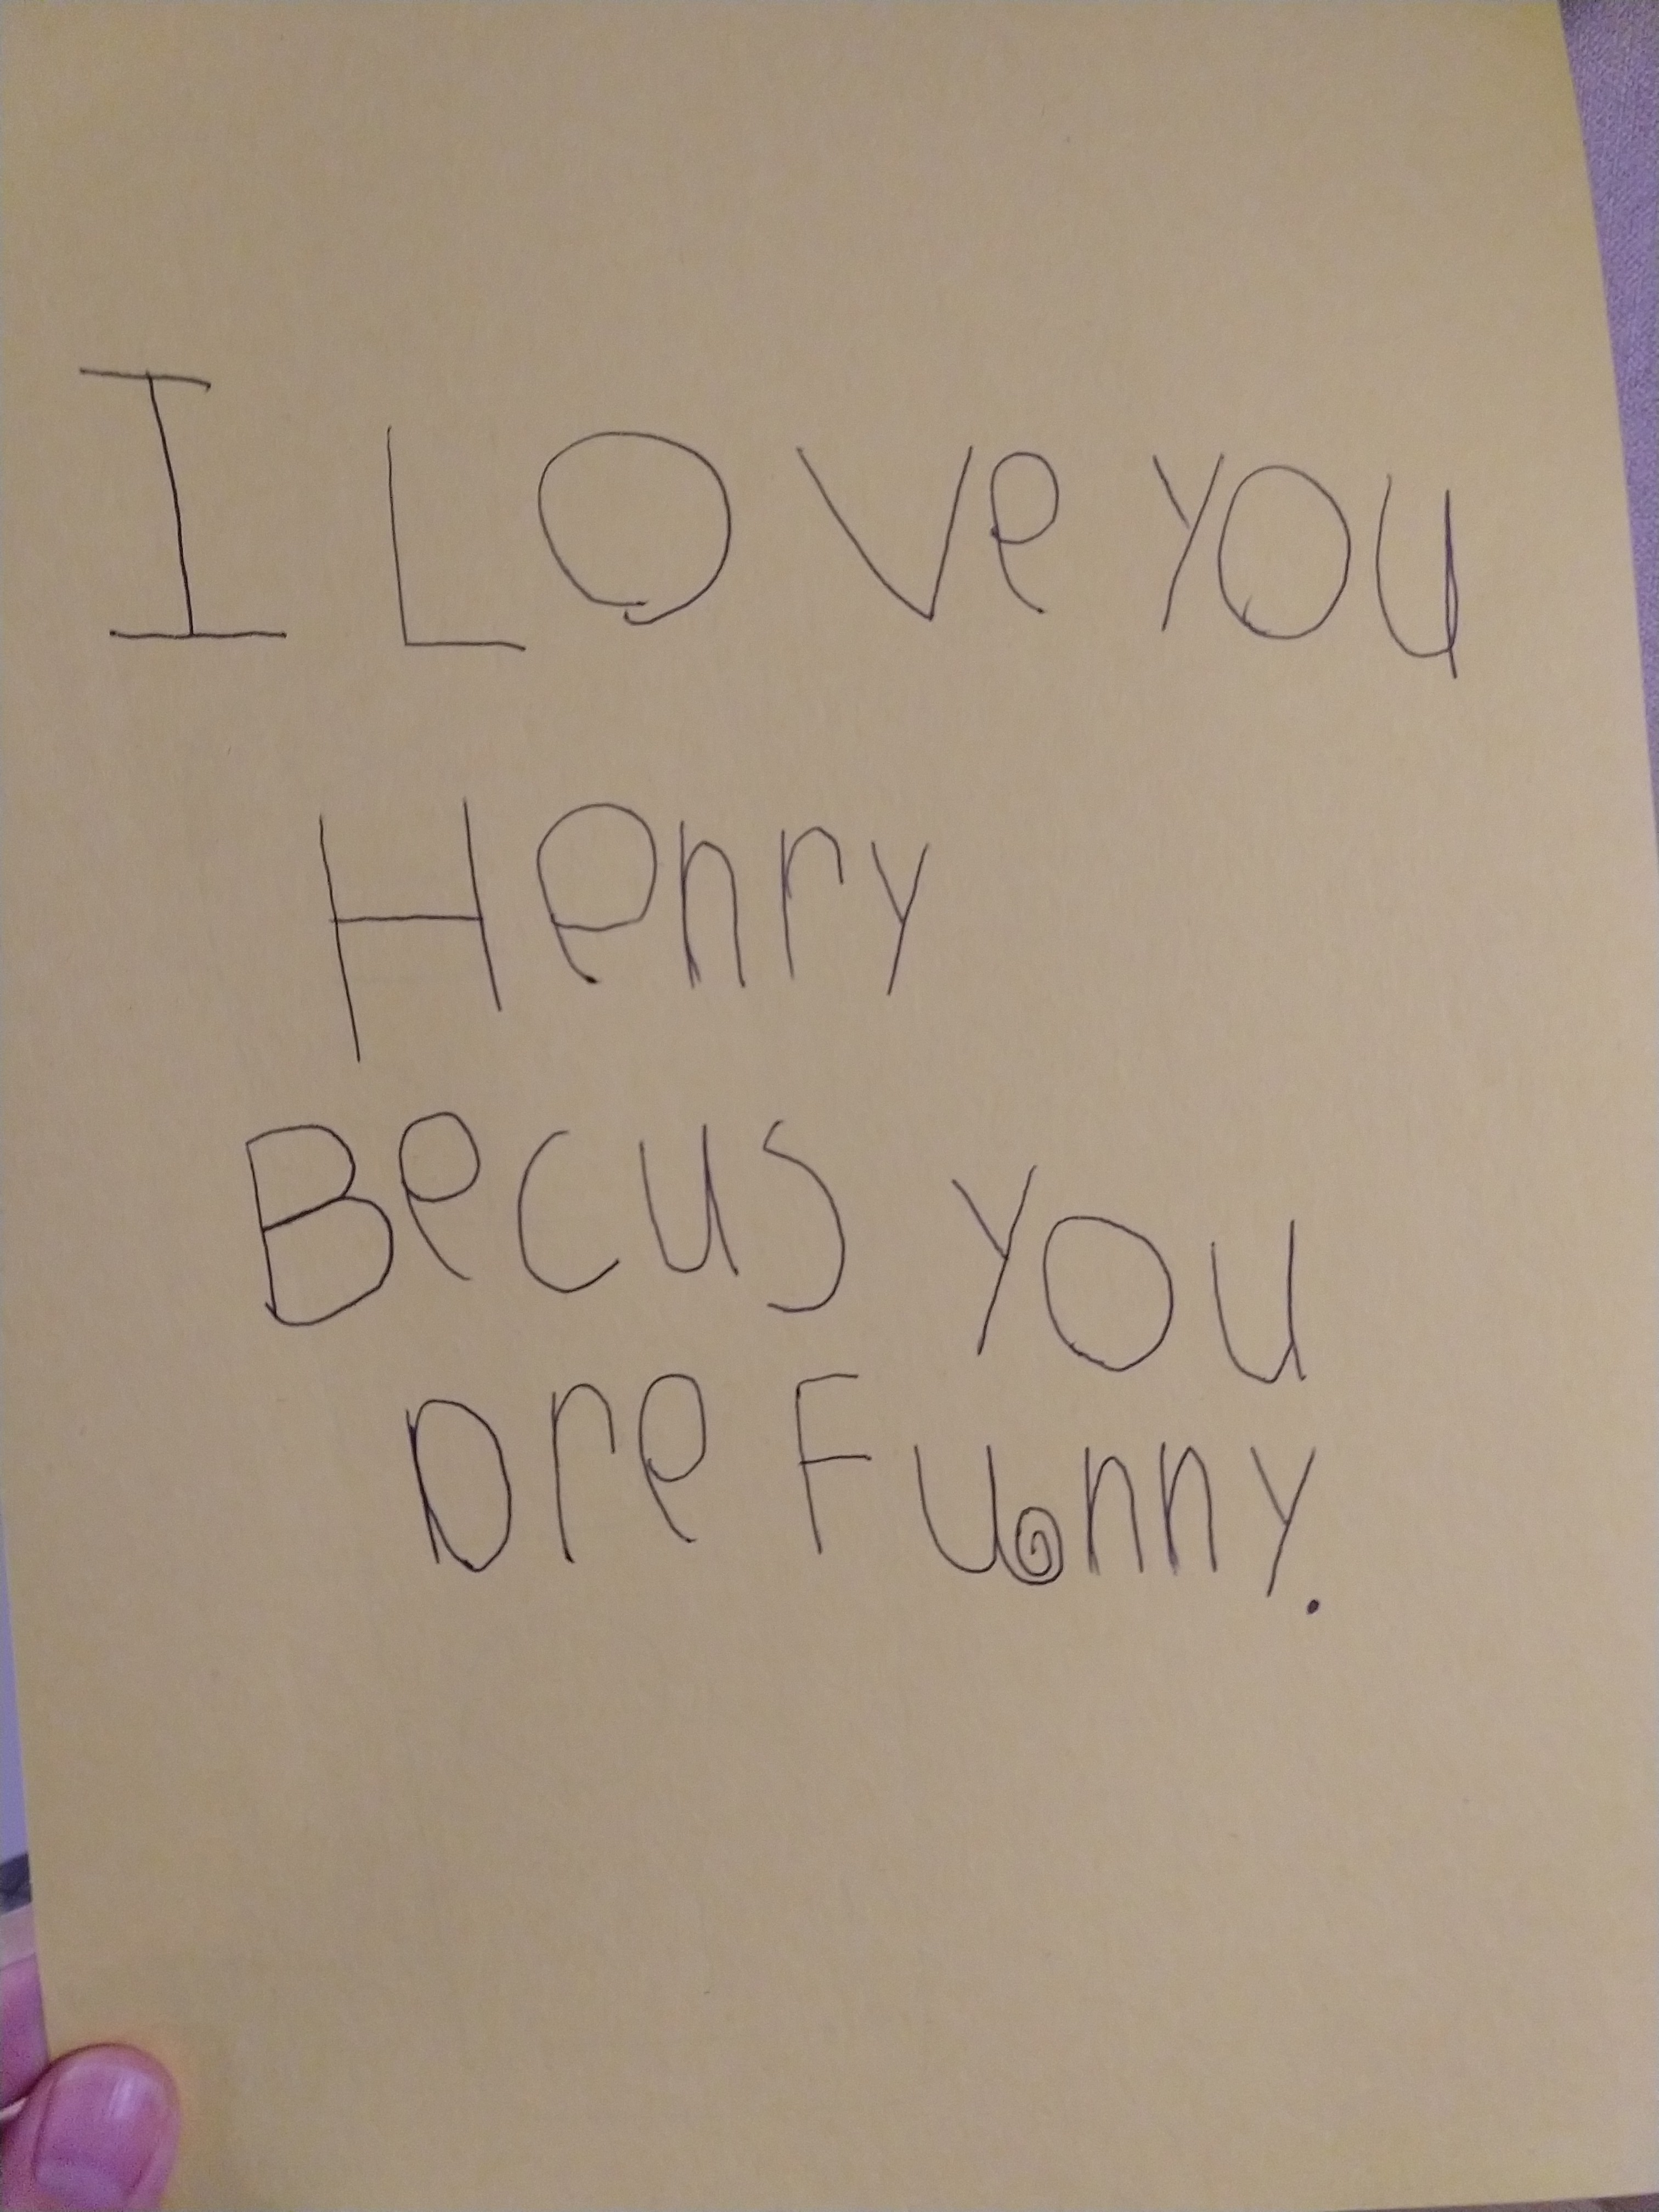 I love you Henry because you are funny.